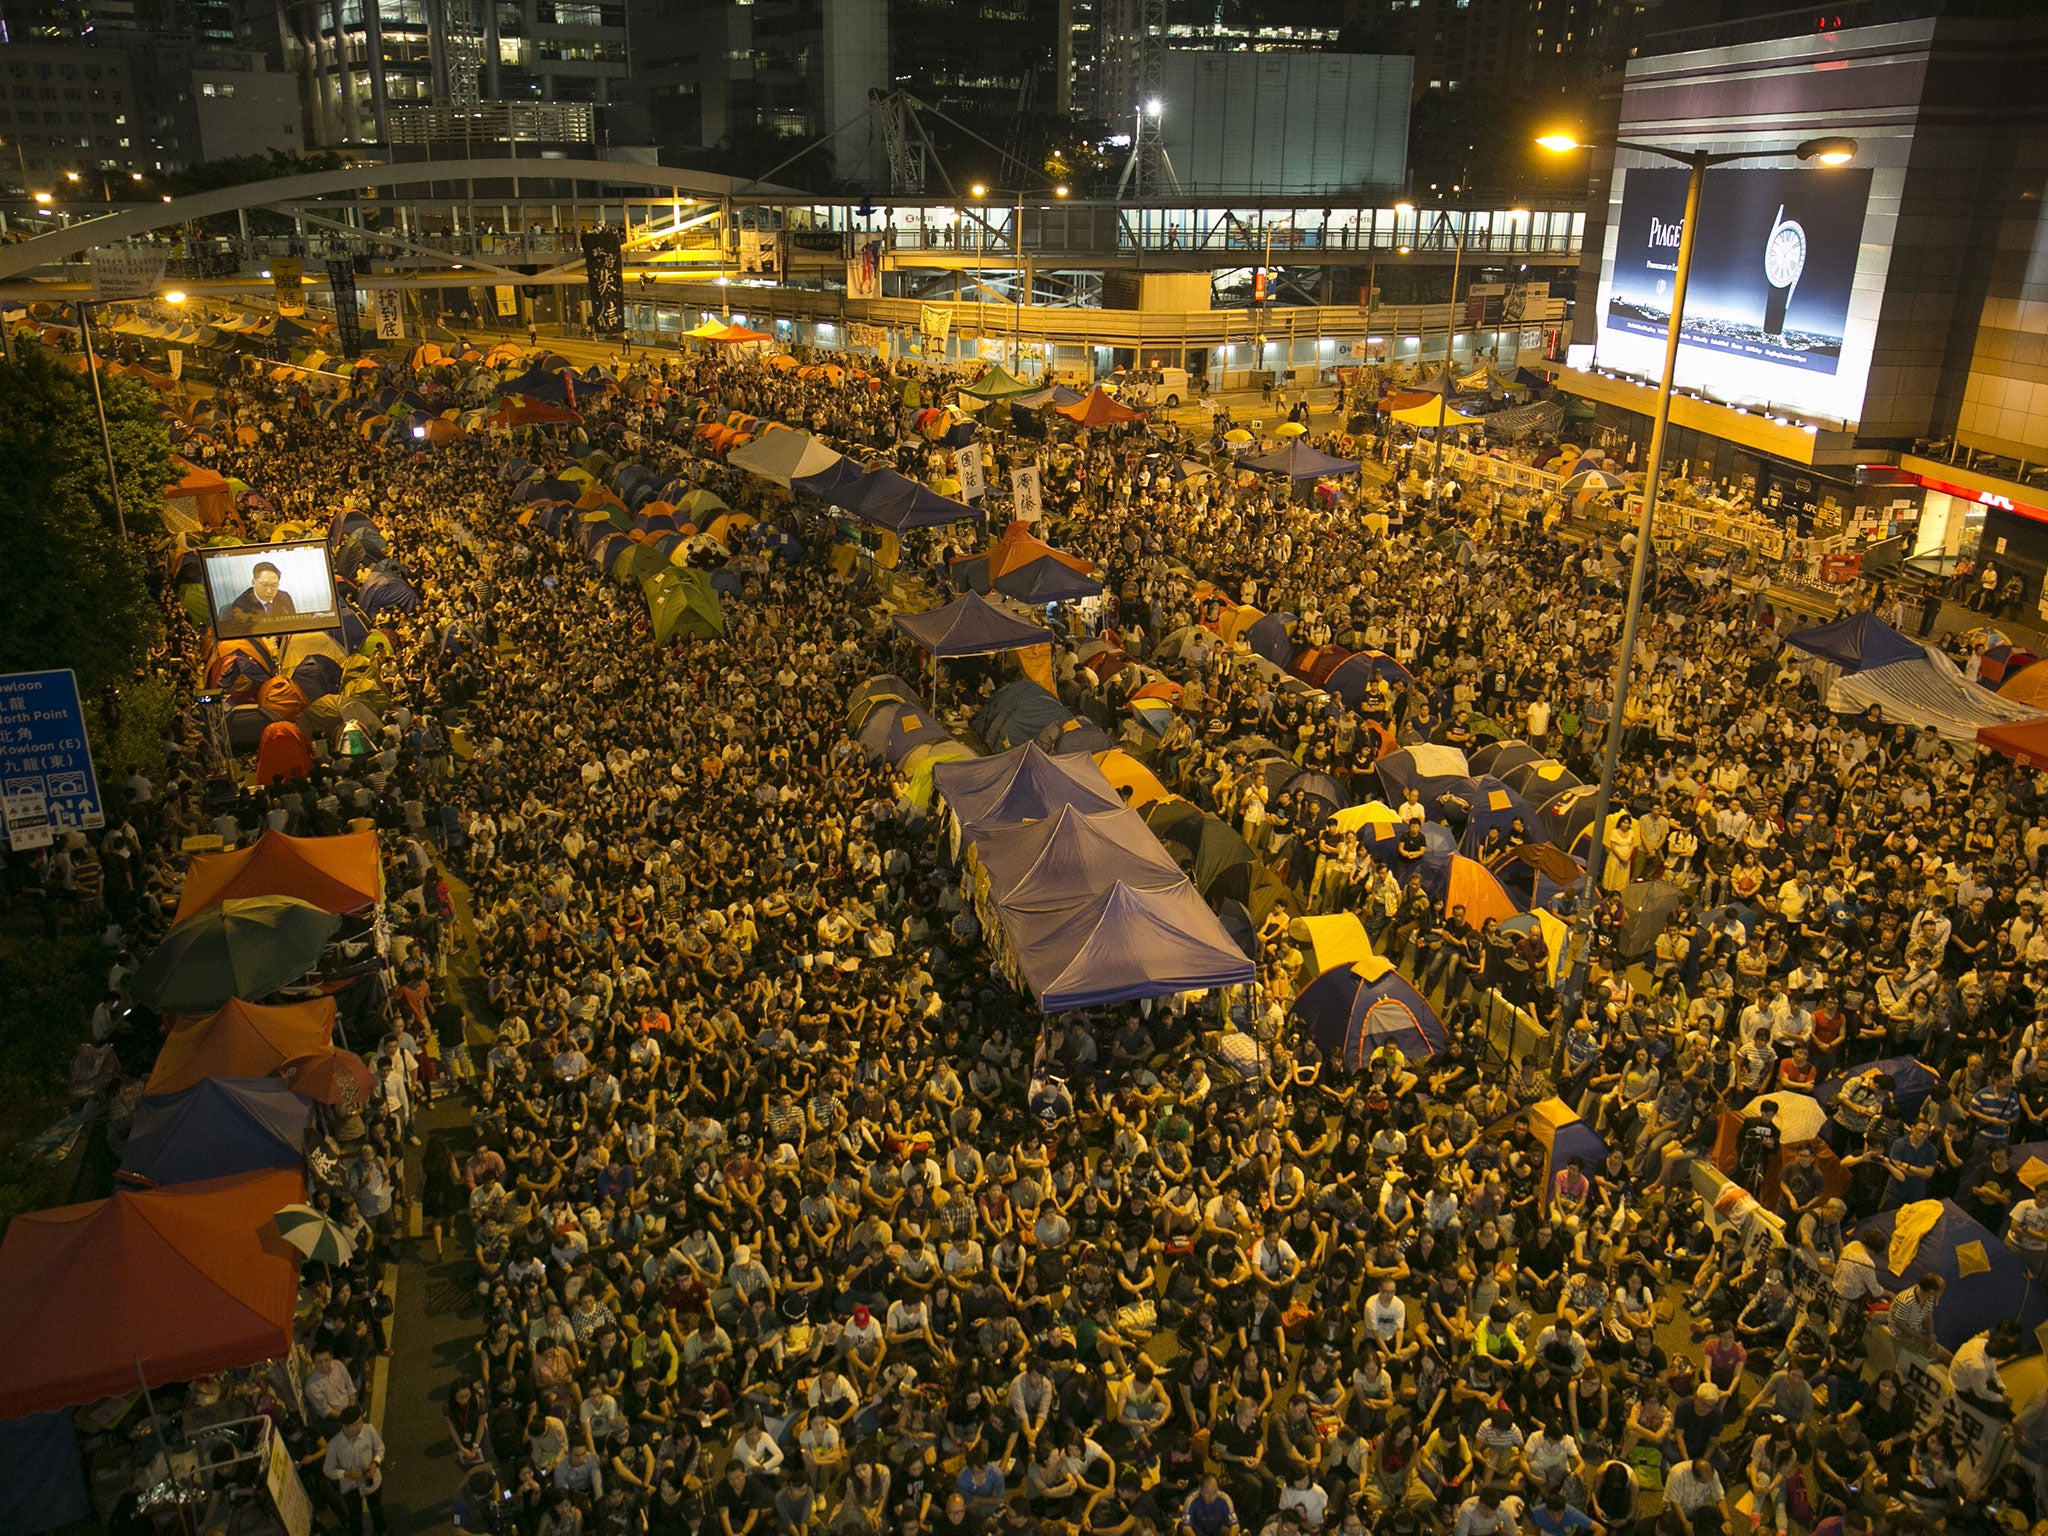 Tens of thousands of protesters gather to listen to the talks between the government officials and the protesters tonight at the main protest site on October 21, 2014 in Hong Kong.